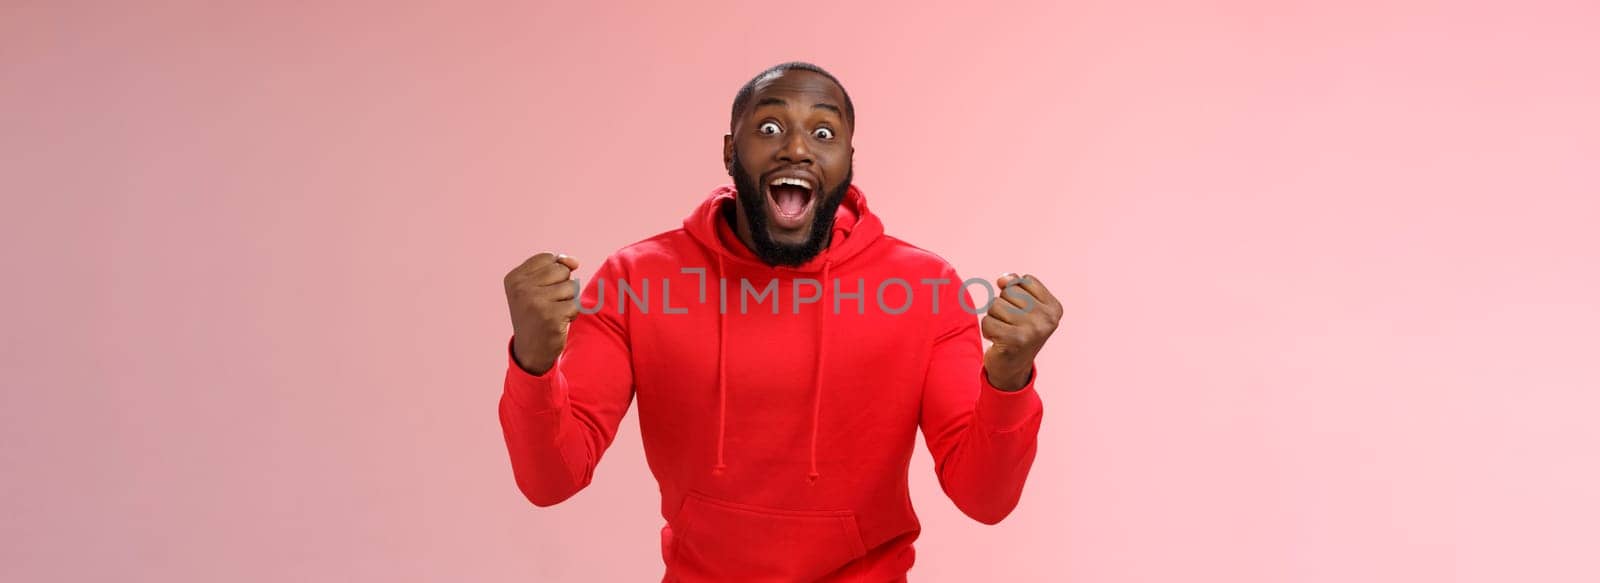 Very happy lucky black bearded guy winning lottery made winning bet clench fists triumphing yelling yes widen eyes surprised joyfully celebrating good news standing impressed, pink background.